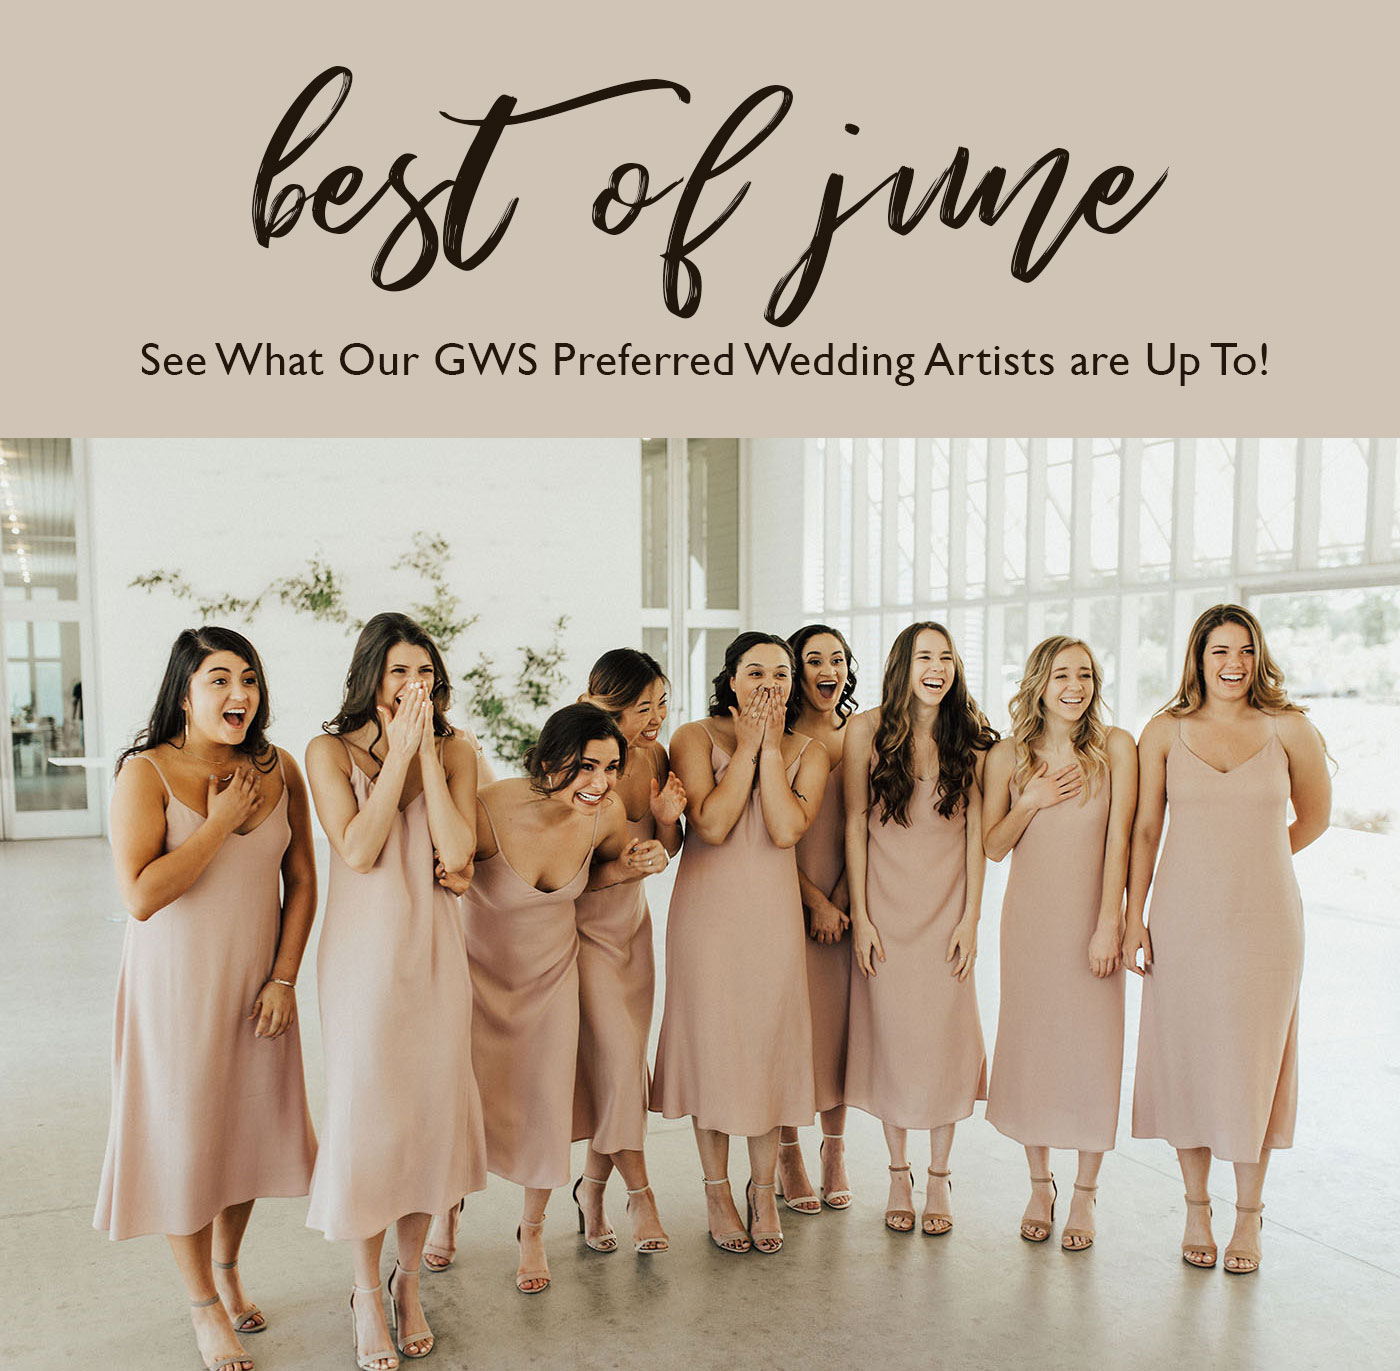 Best of June from Green Wedding Shoes' Preferred Wedding Artists